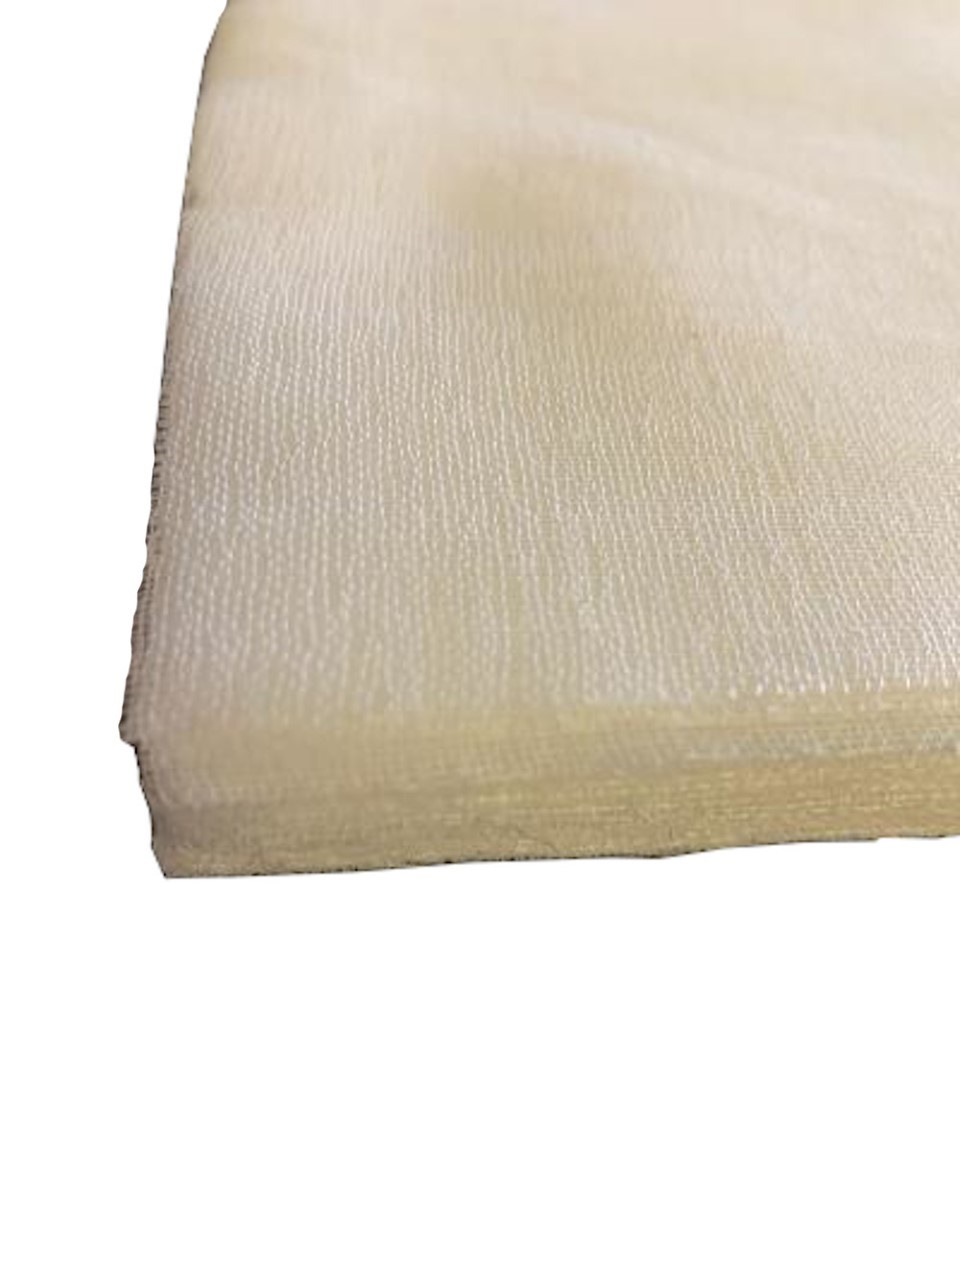 Grade 90 White Cheesecloth - 6" x 6" Squares (100 Pack) - Click Image to Close